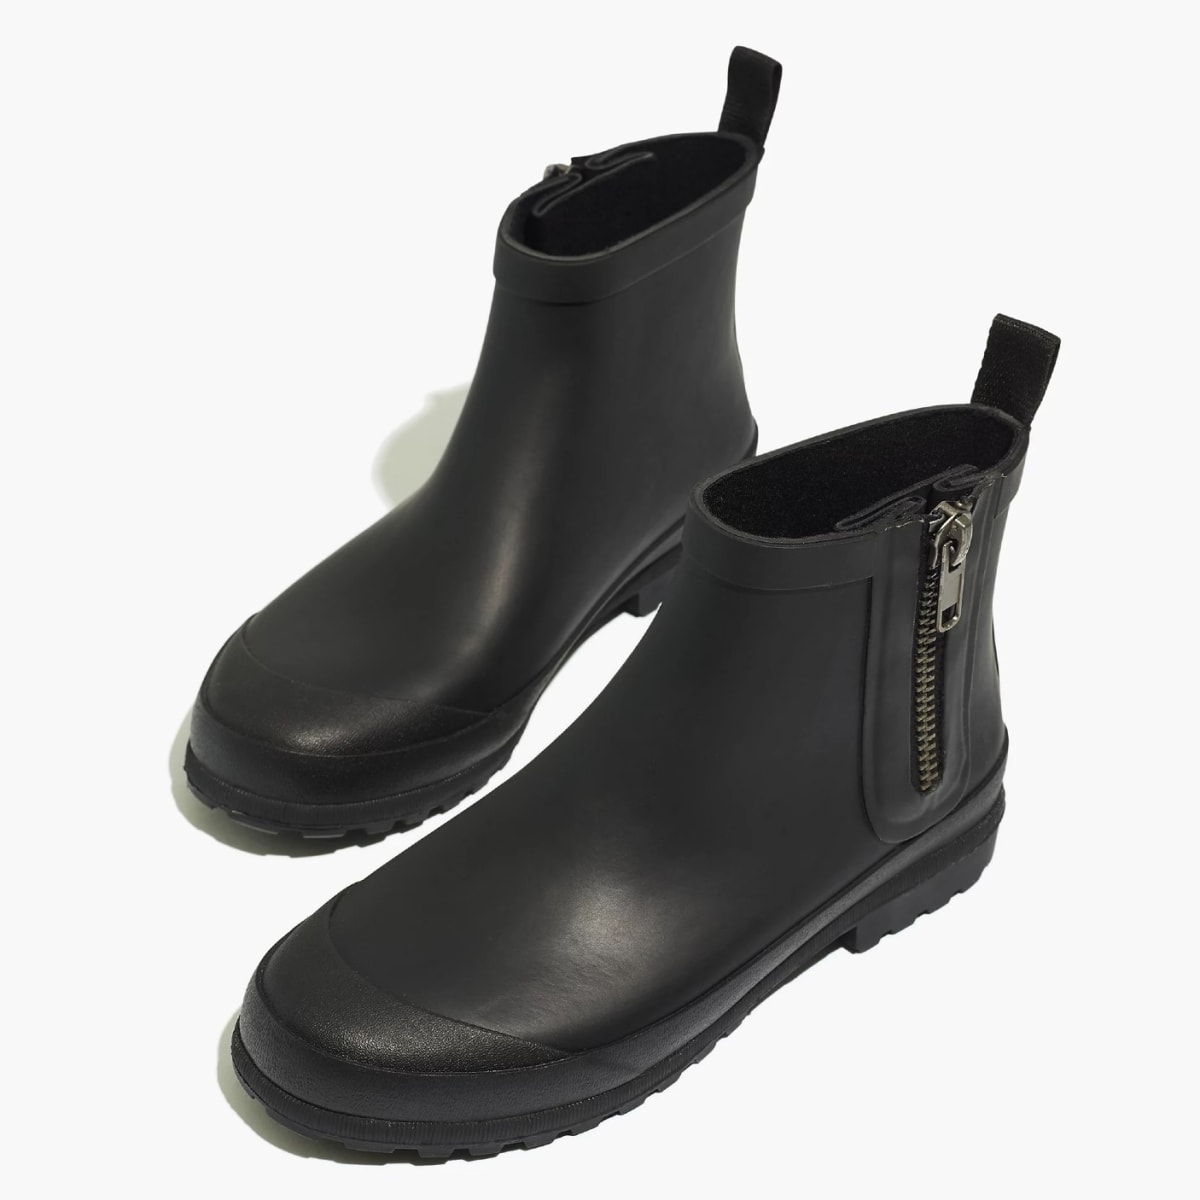 Not bothered by the rain in these @louisvuitton Rain boots